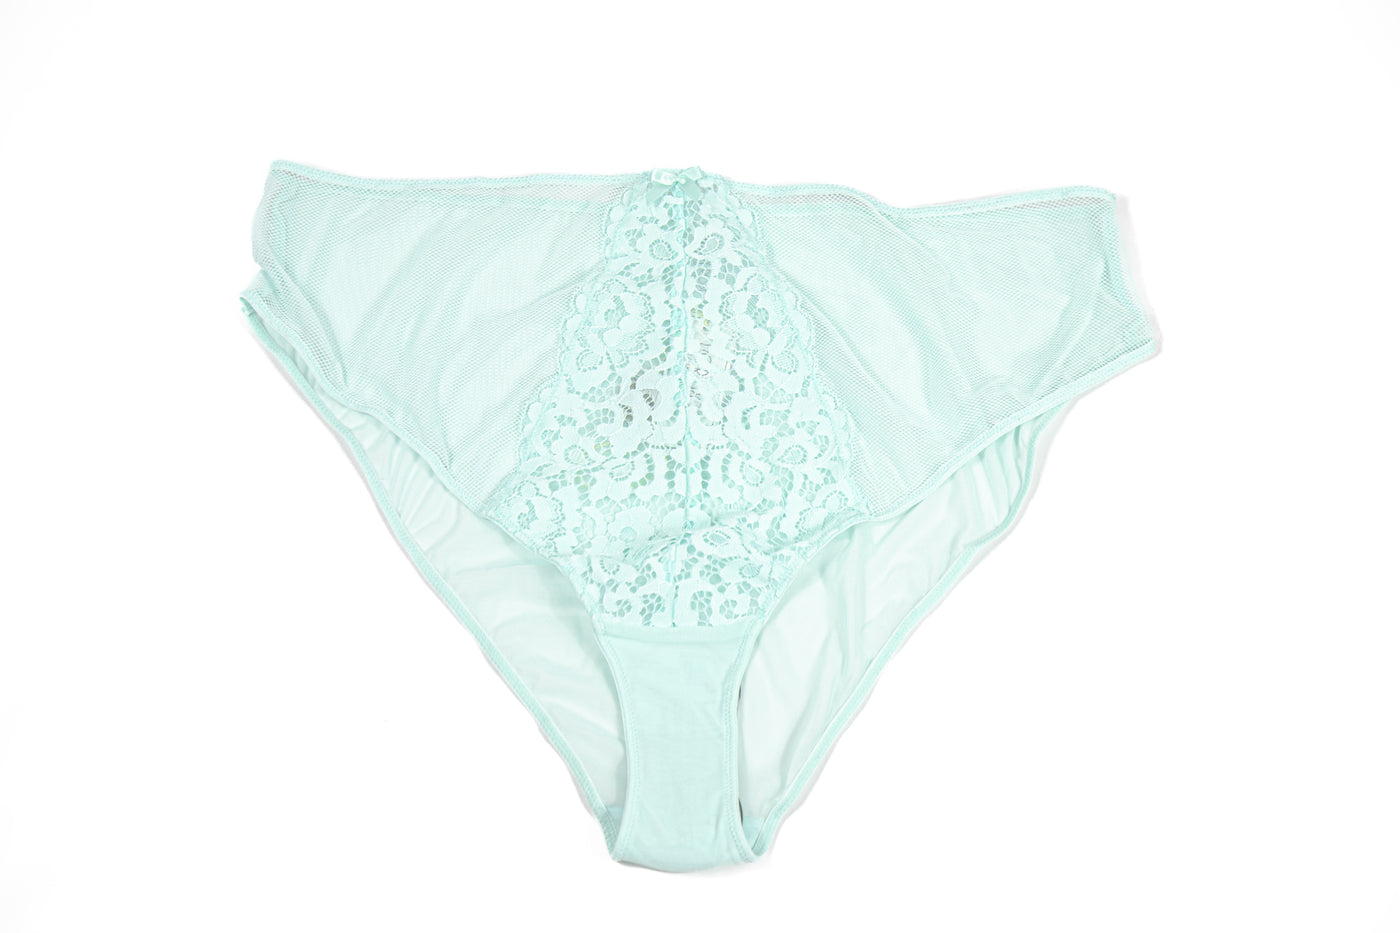 Ivory Rose High Waist Pant in Lace and Fishnet in Aqua